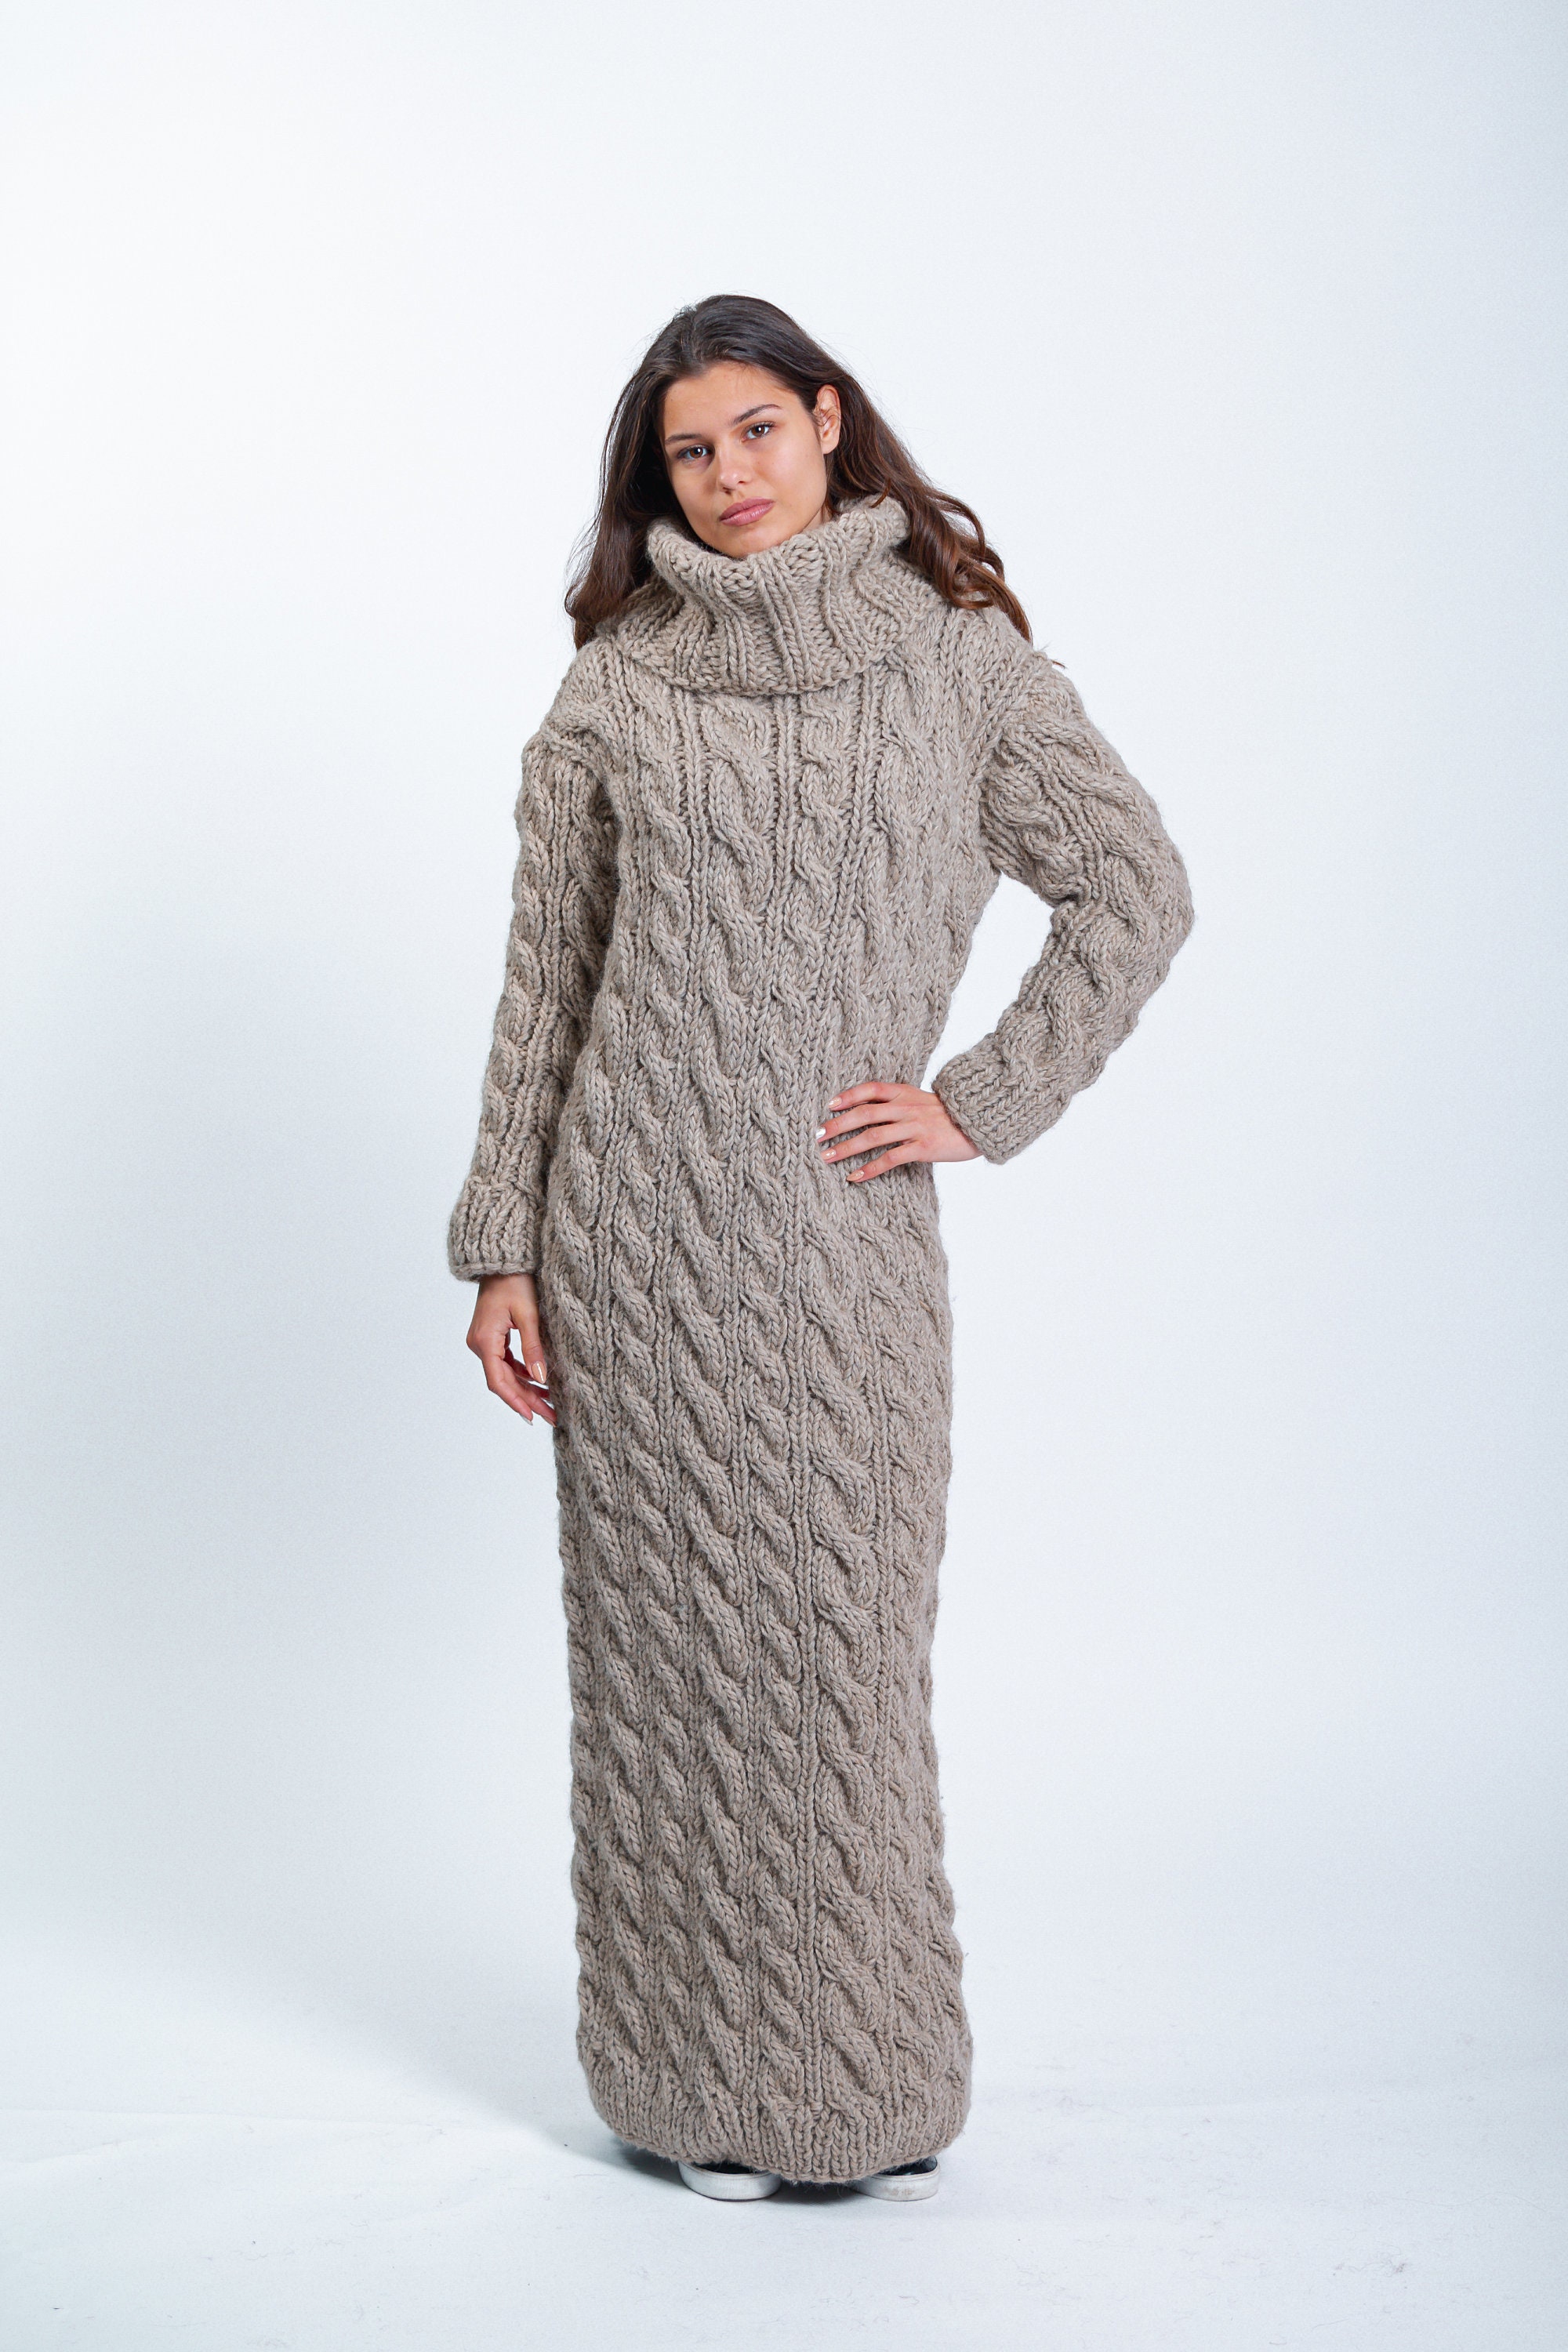 Long Mohair Sweater Dress Hand Knitted Fuzzy Turtleneck Dress by Supertanya  - Etsy | Sweater dress, Mohair sweater, Knit gown